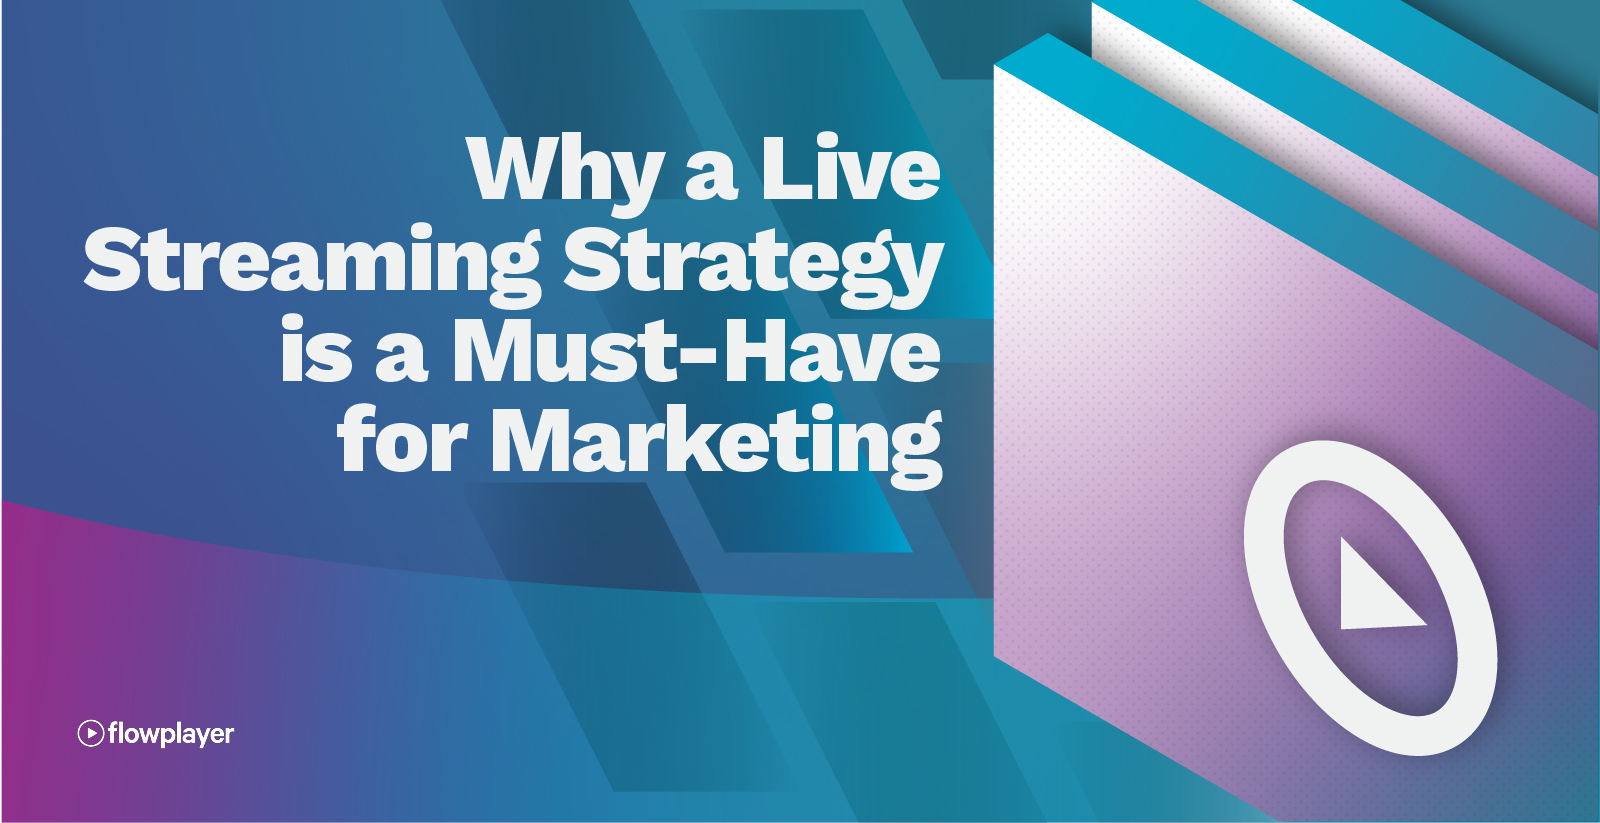 Why a Live Streaming Strategy is a Must-Have for Marketing